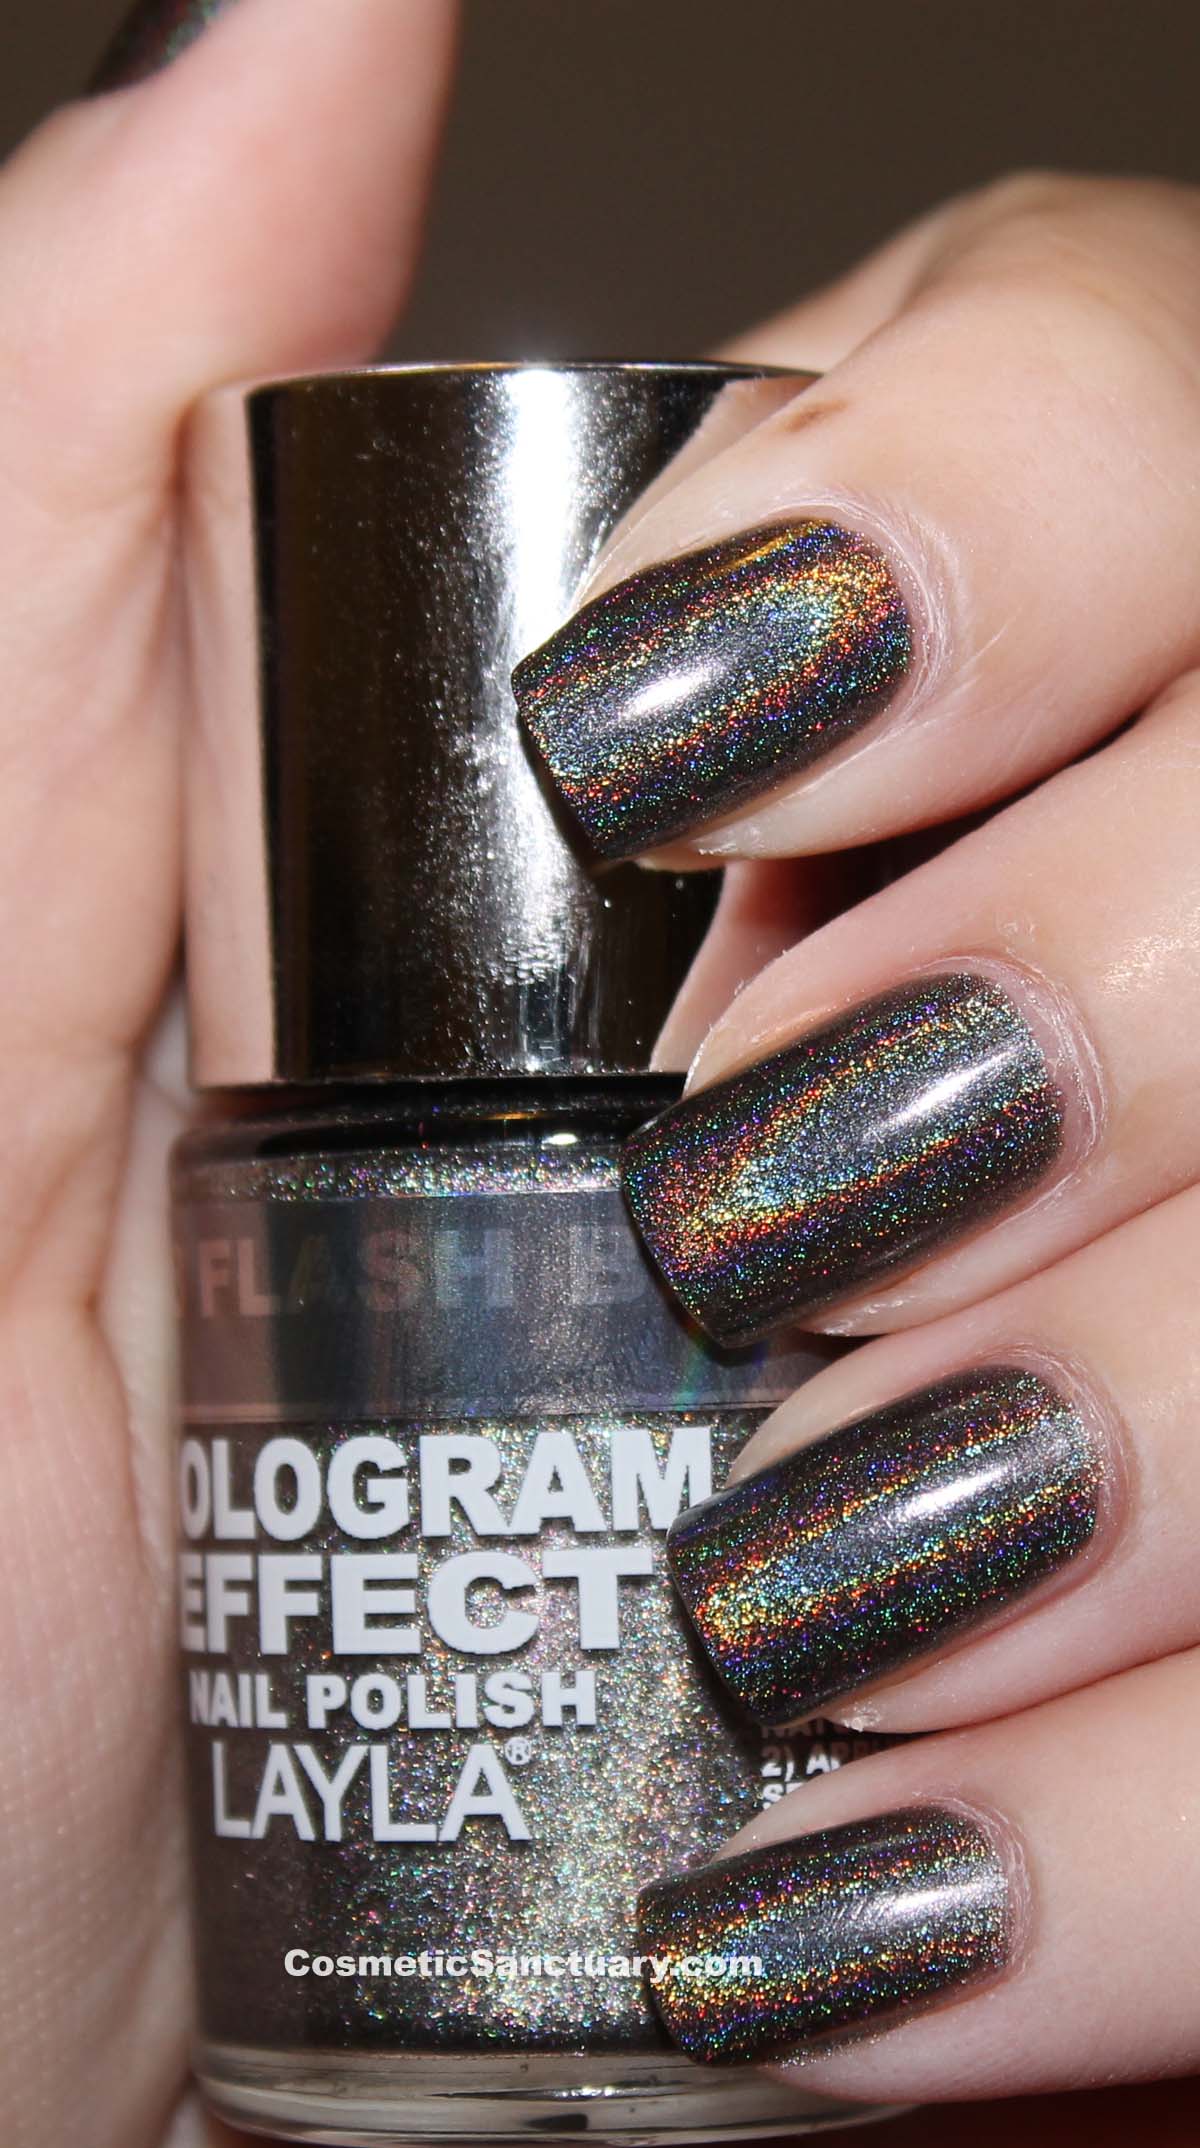 Layla Hologram Effect Nail Polish Swatches and Review